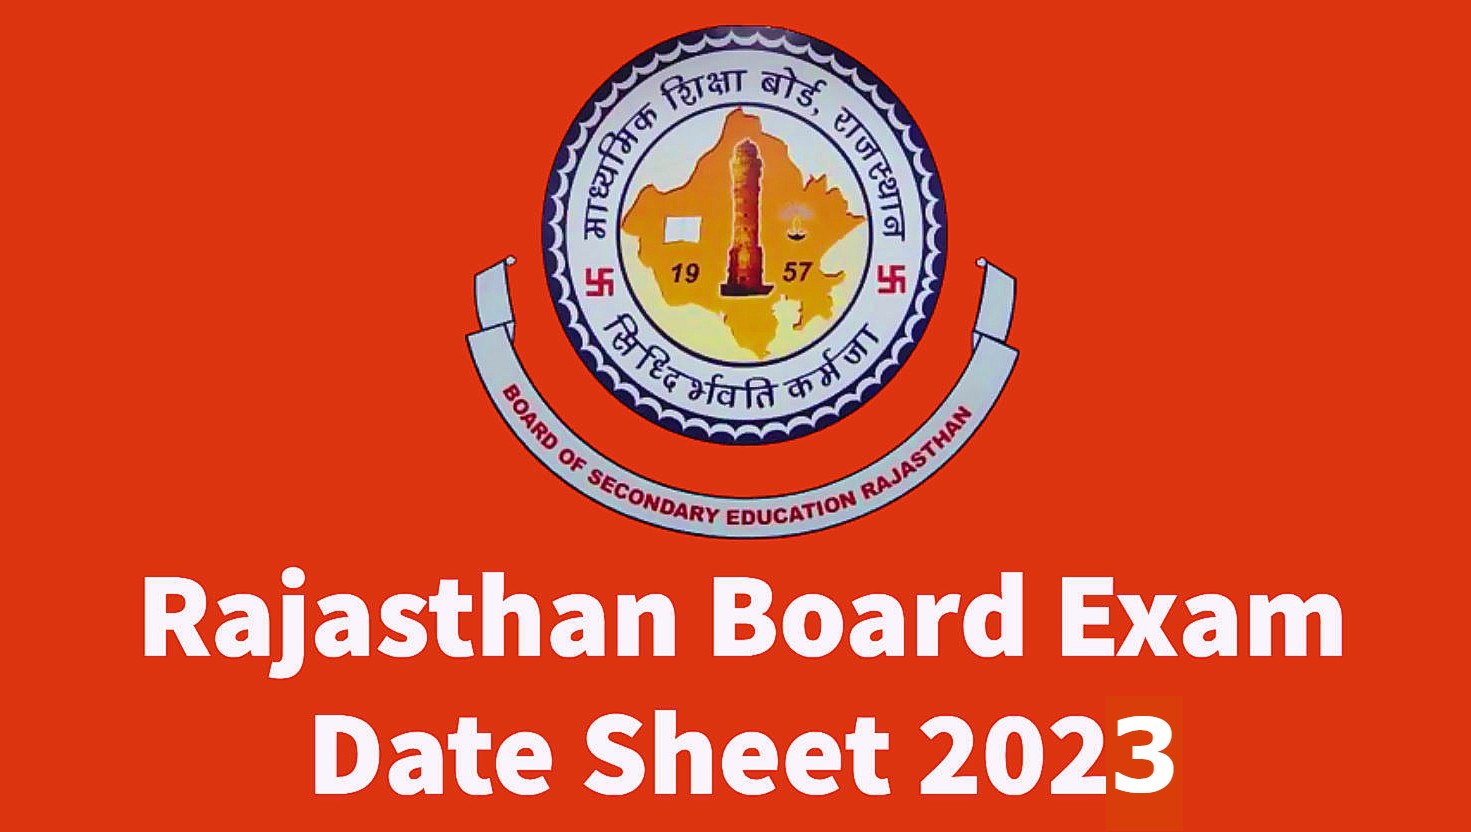 Date Sheet for Rajasthan Board's 10th and 12th Grades